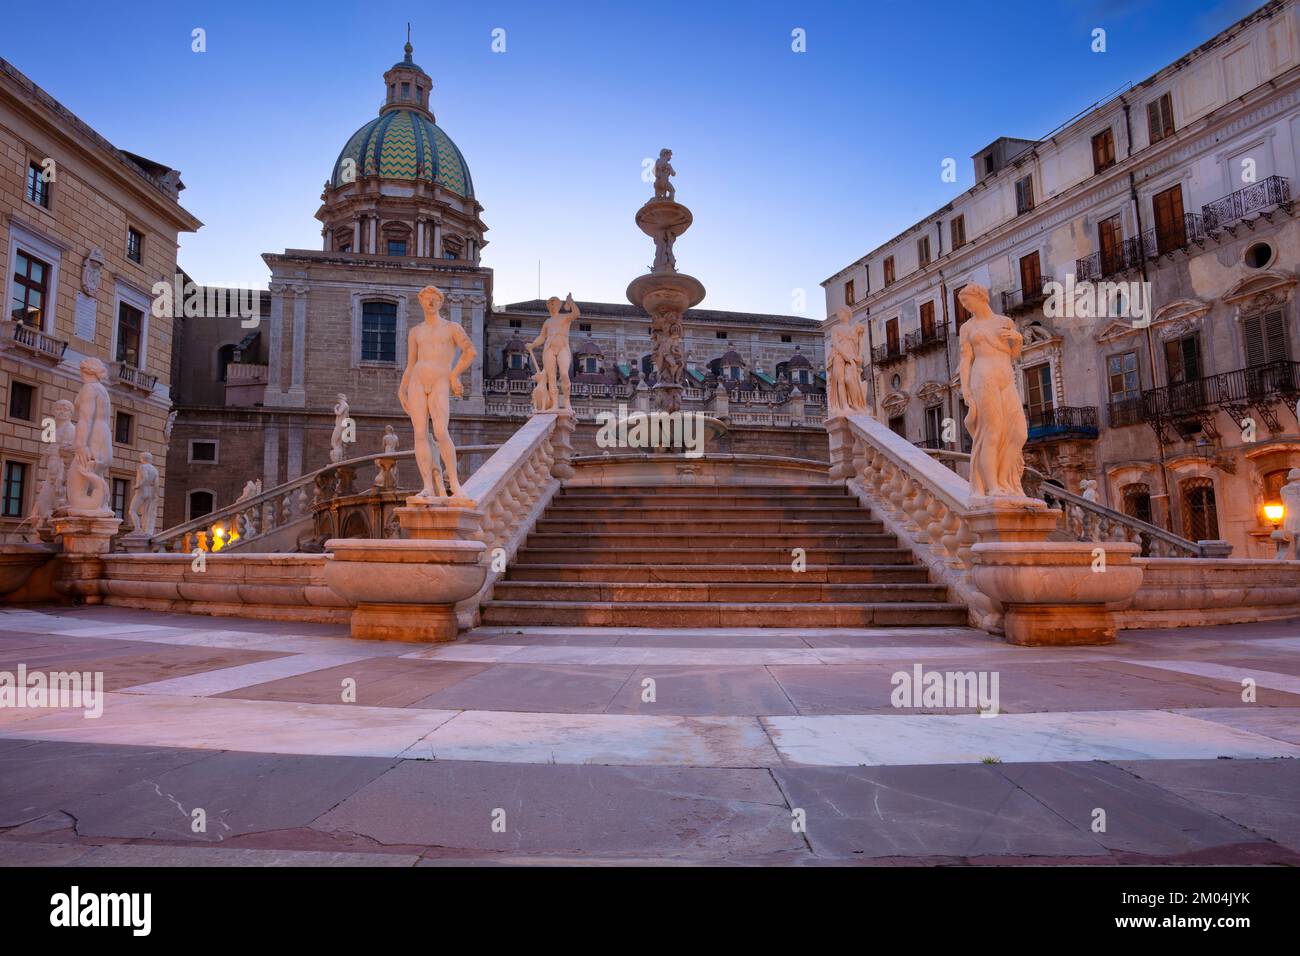 Palermo, Sicily, Italy. Cityscape image of Palermo, Sicily with  famous Praetorian Fountain located in Piazza Pretoria at sunset. Stock Photo